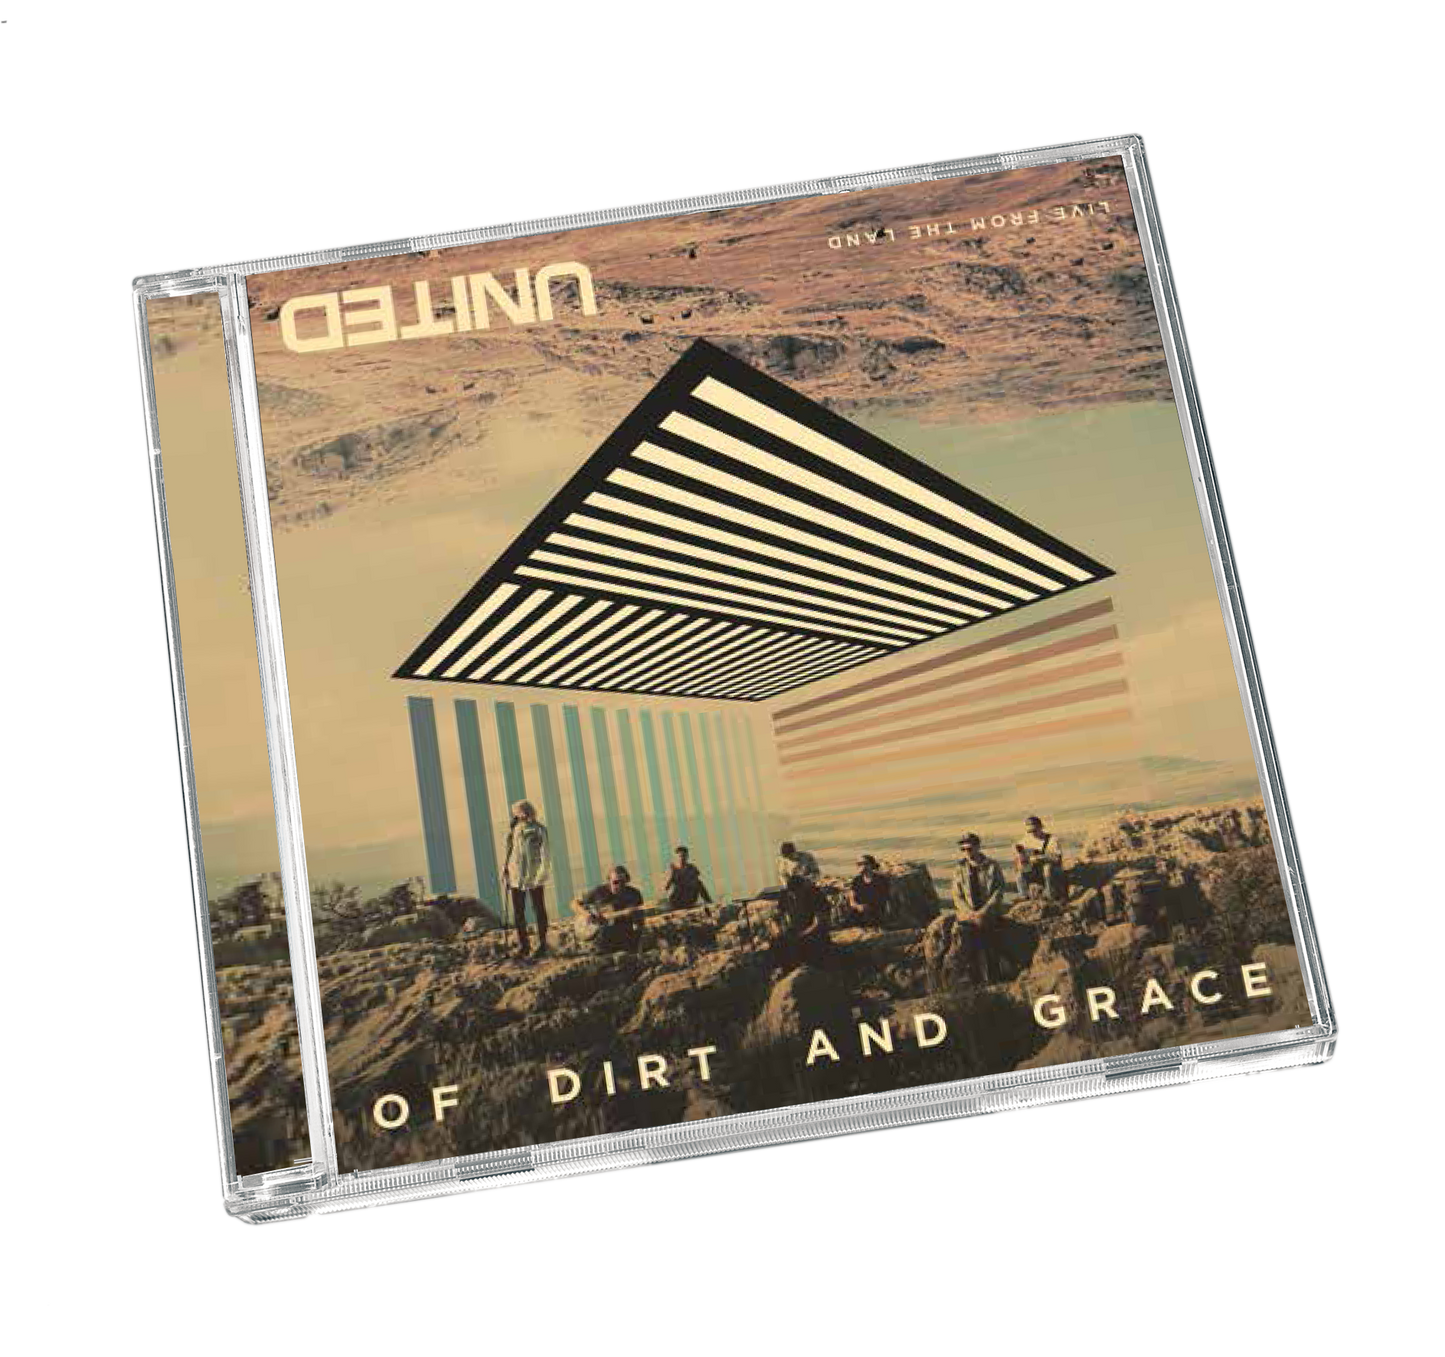 Of Dirt And Grace - Live From The Land CD